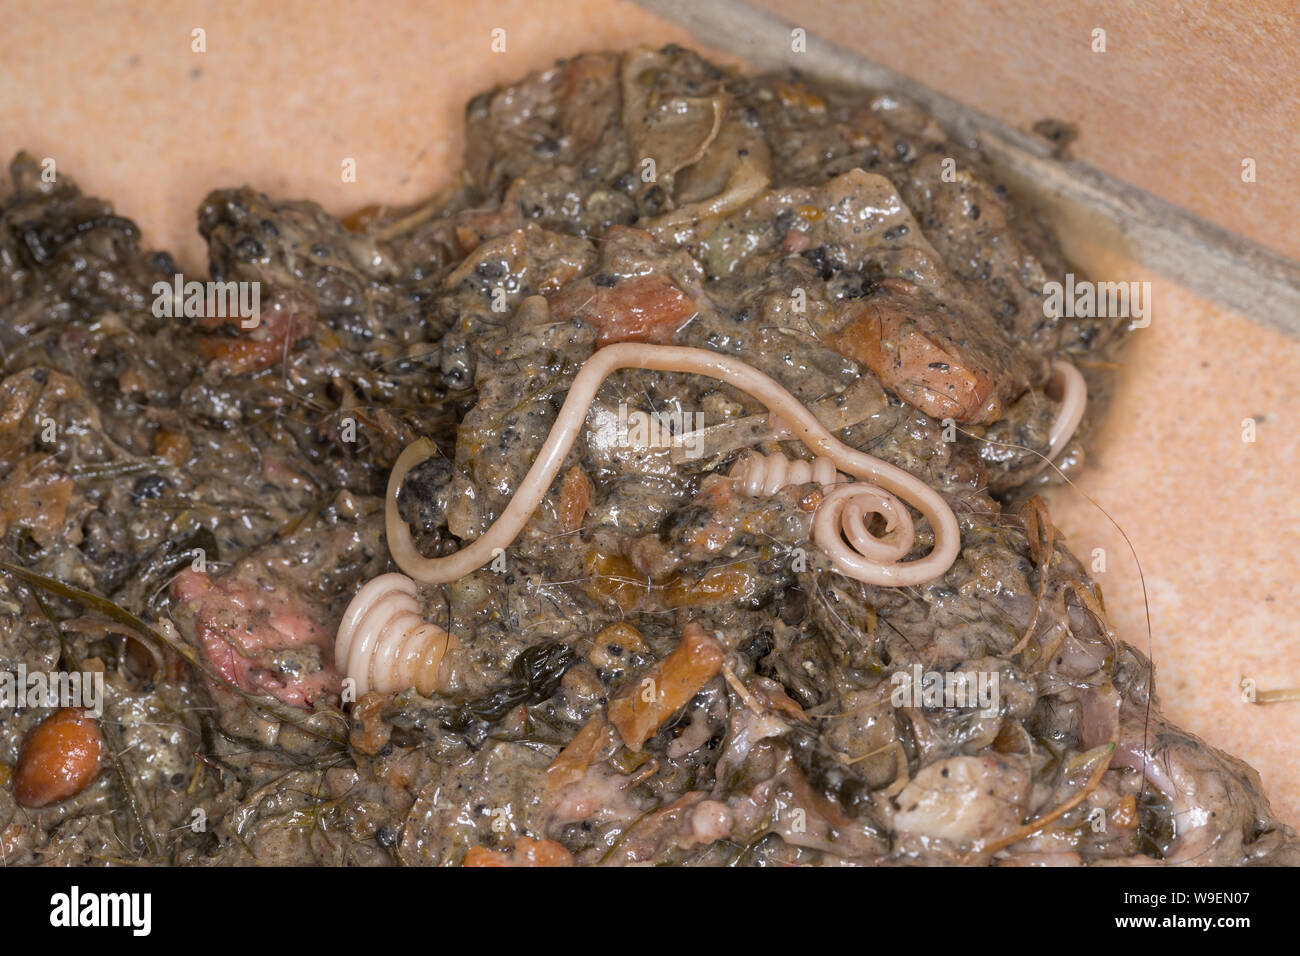 Toxocara Canis High Resolution Stock Photography and Images - Alamy